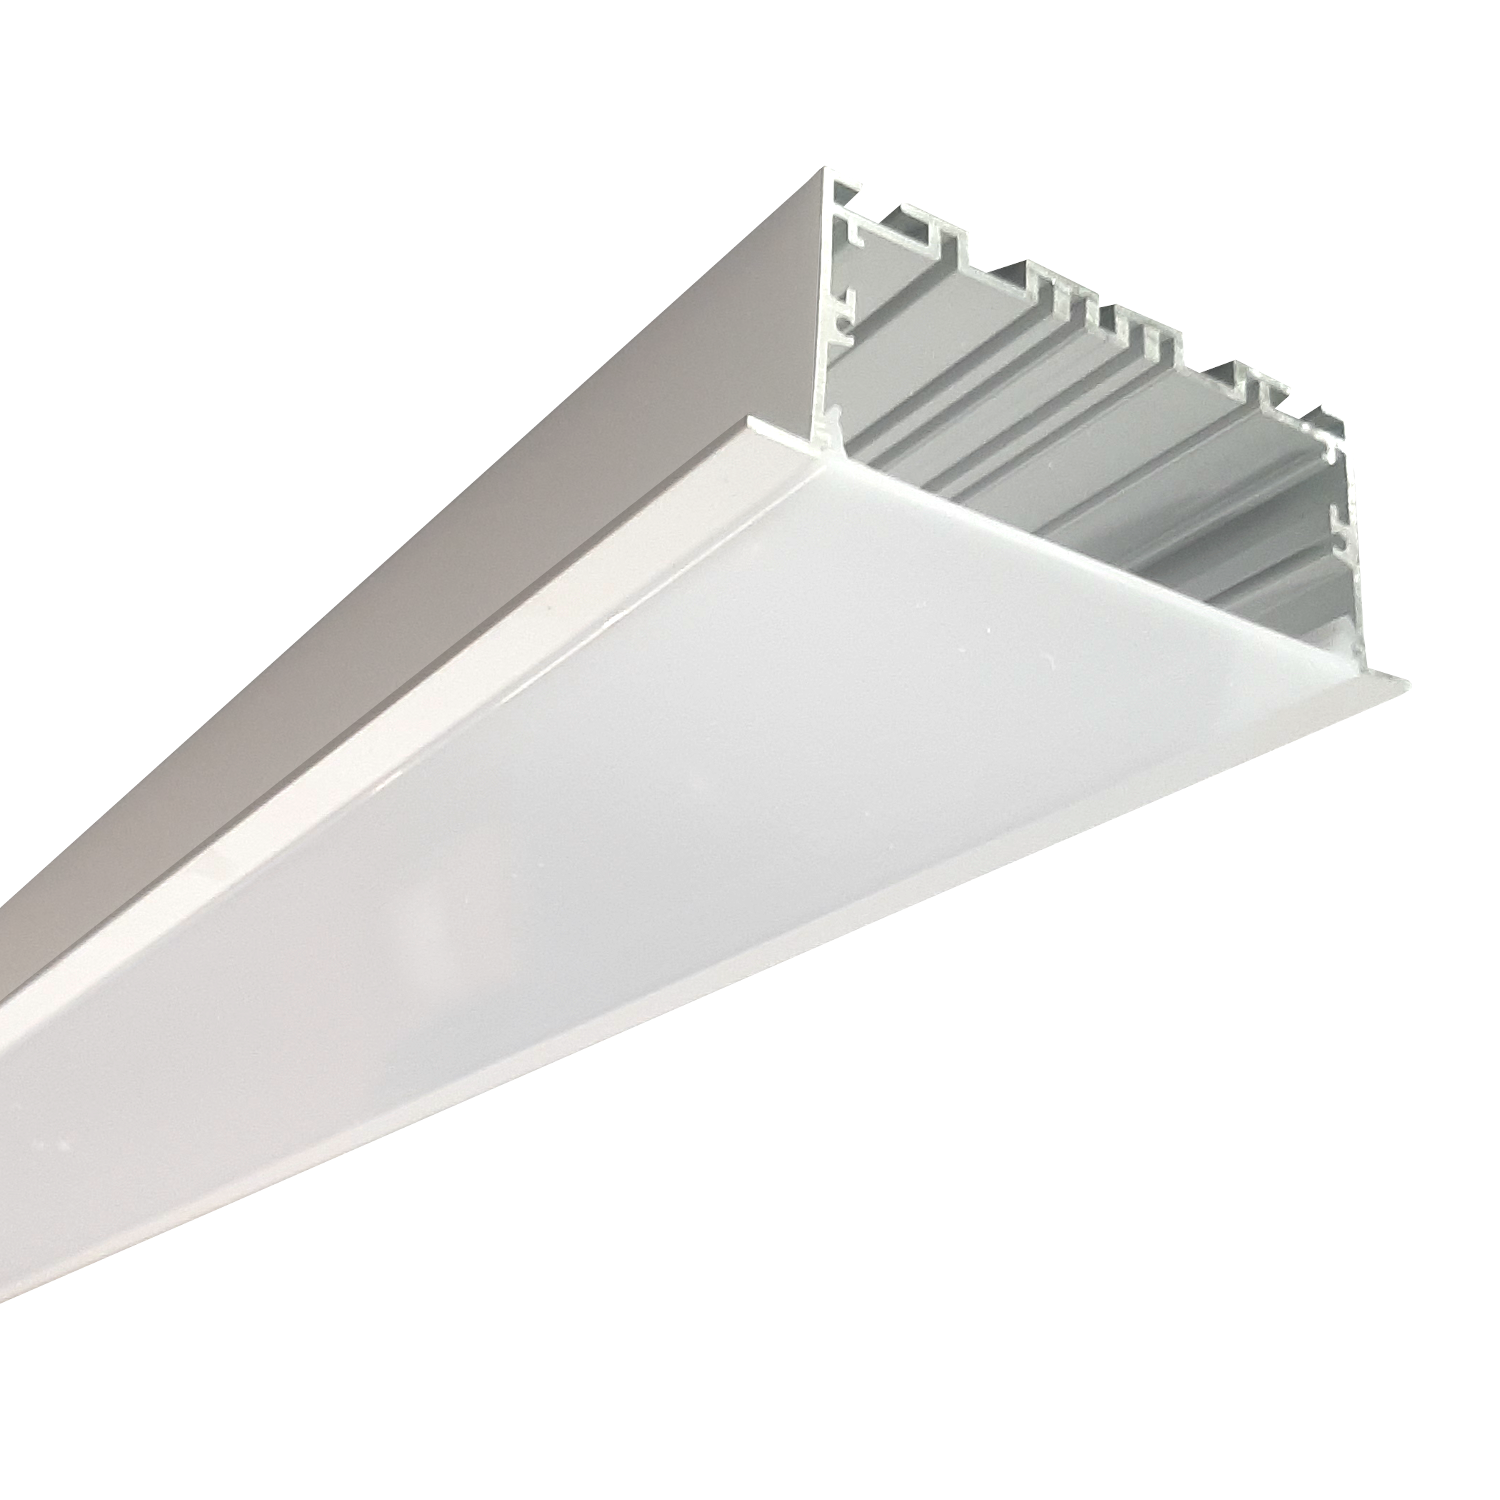 Product Image of RSA-52 95mm Wide Extrusion for LED Strip in Ceilings